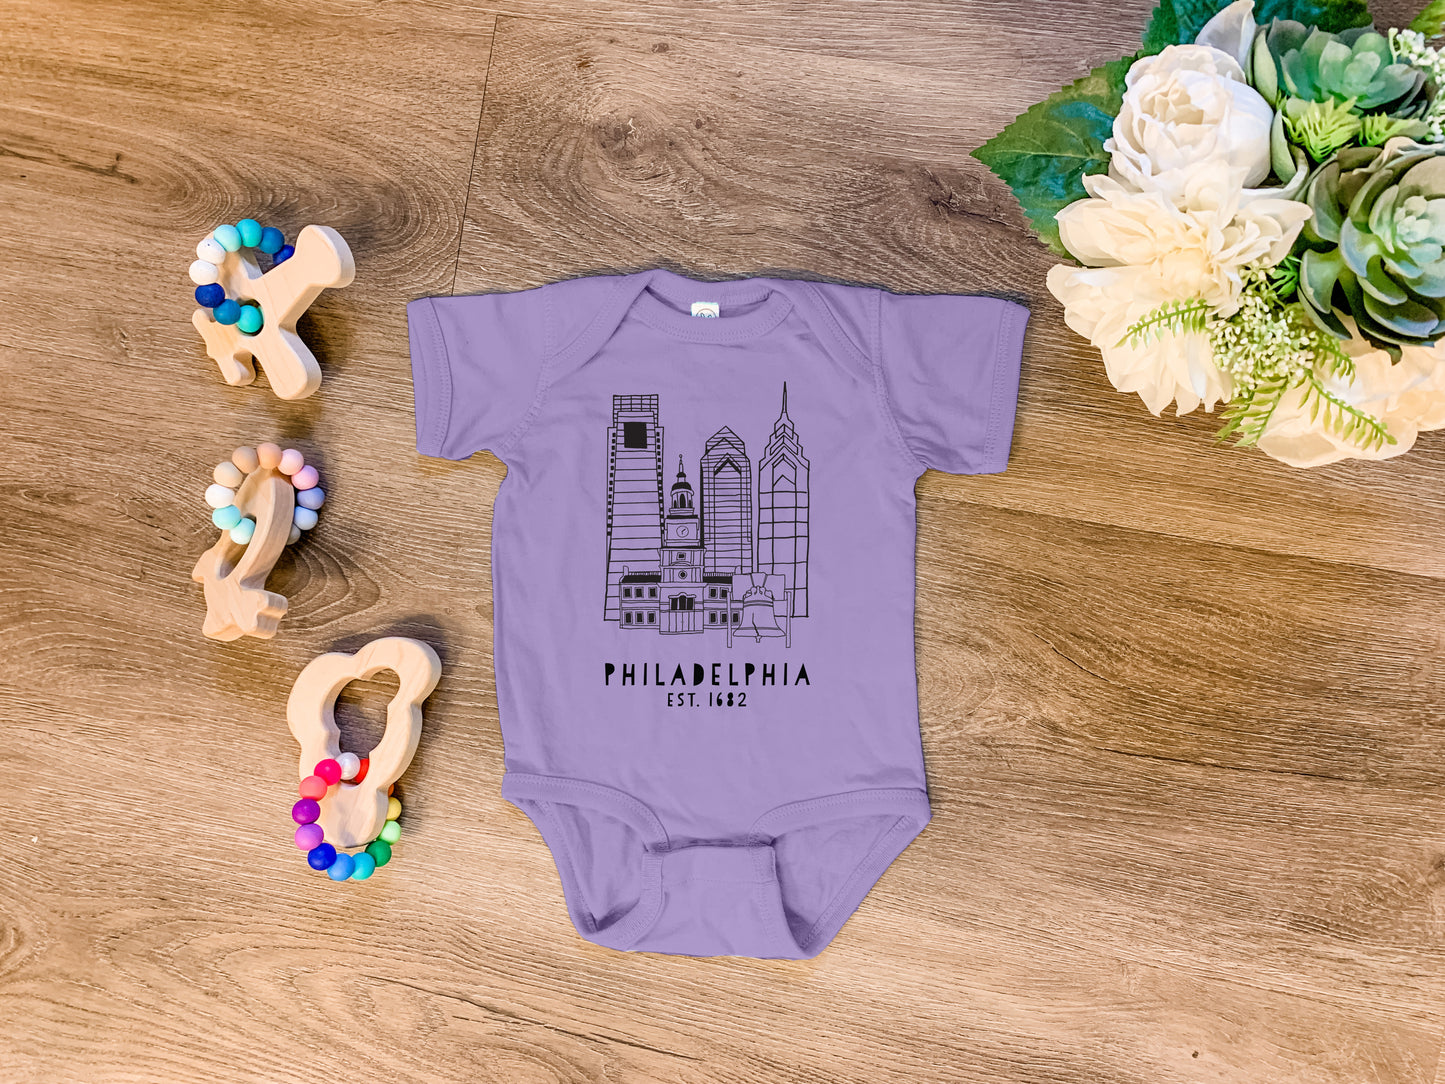 Downtown Philadelphia, PA - Onesie - Heather Gray, Chill, or Lavender